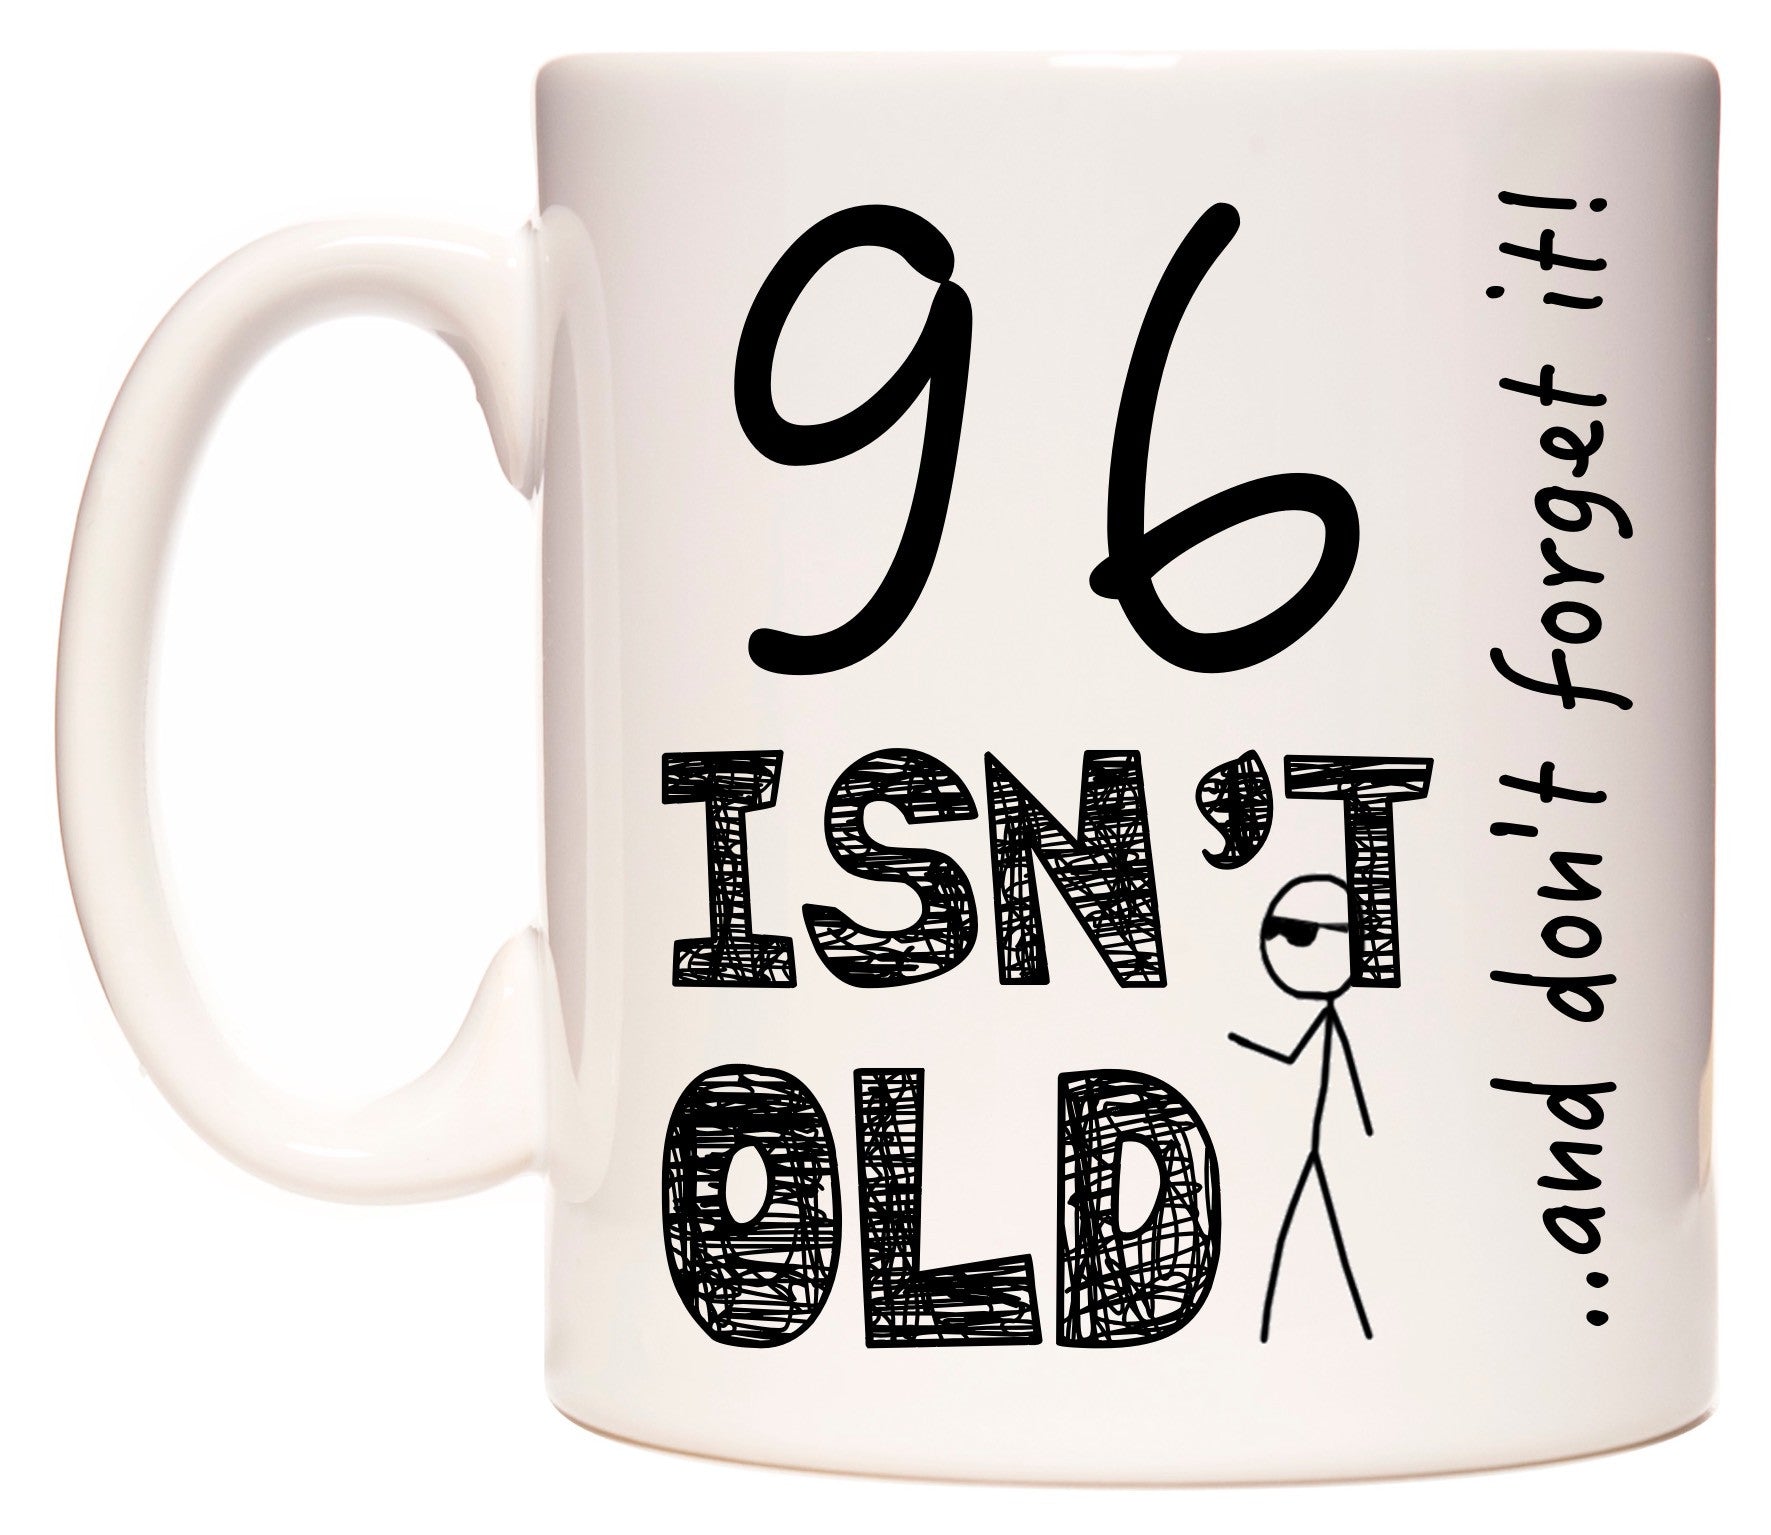 This mug features 96 Isn't Old